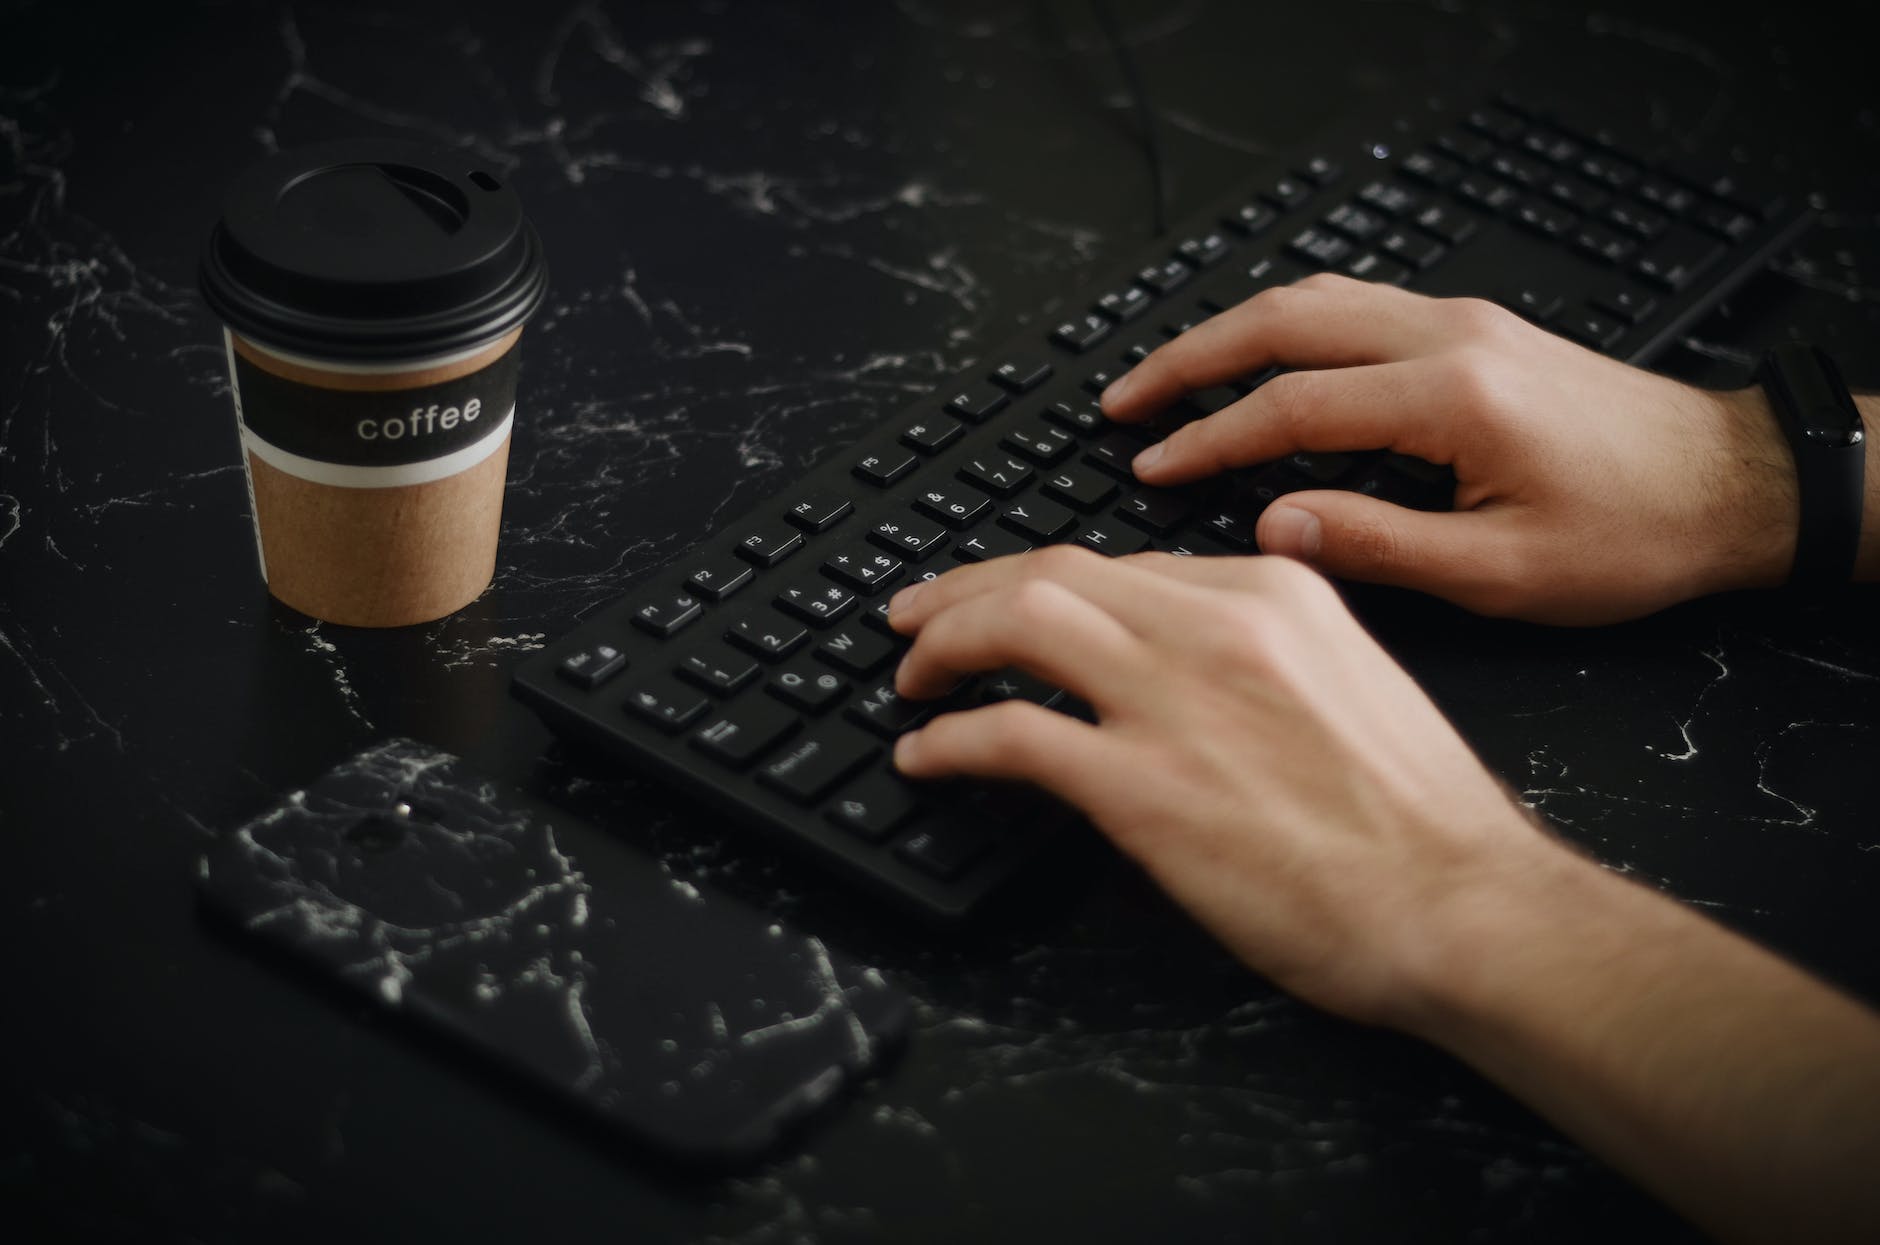 person using keyboard beside phone and coffee cup